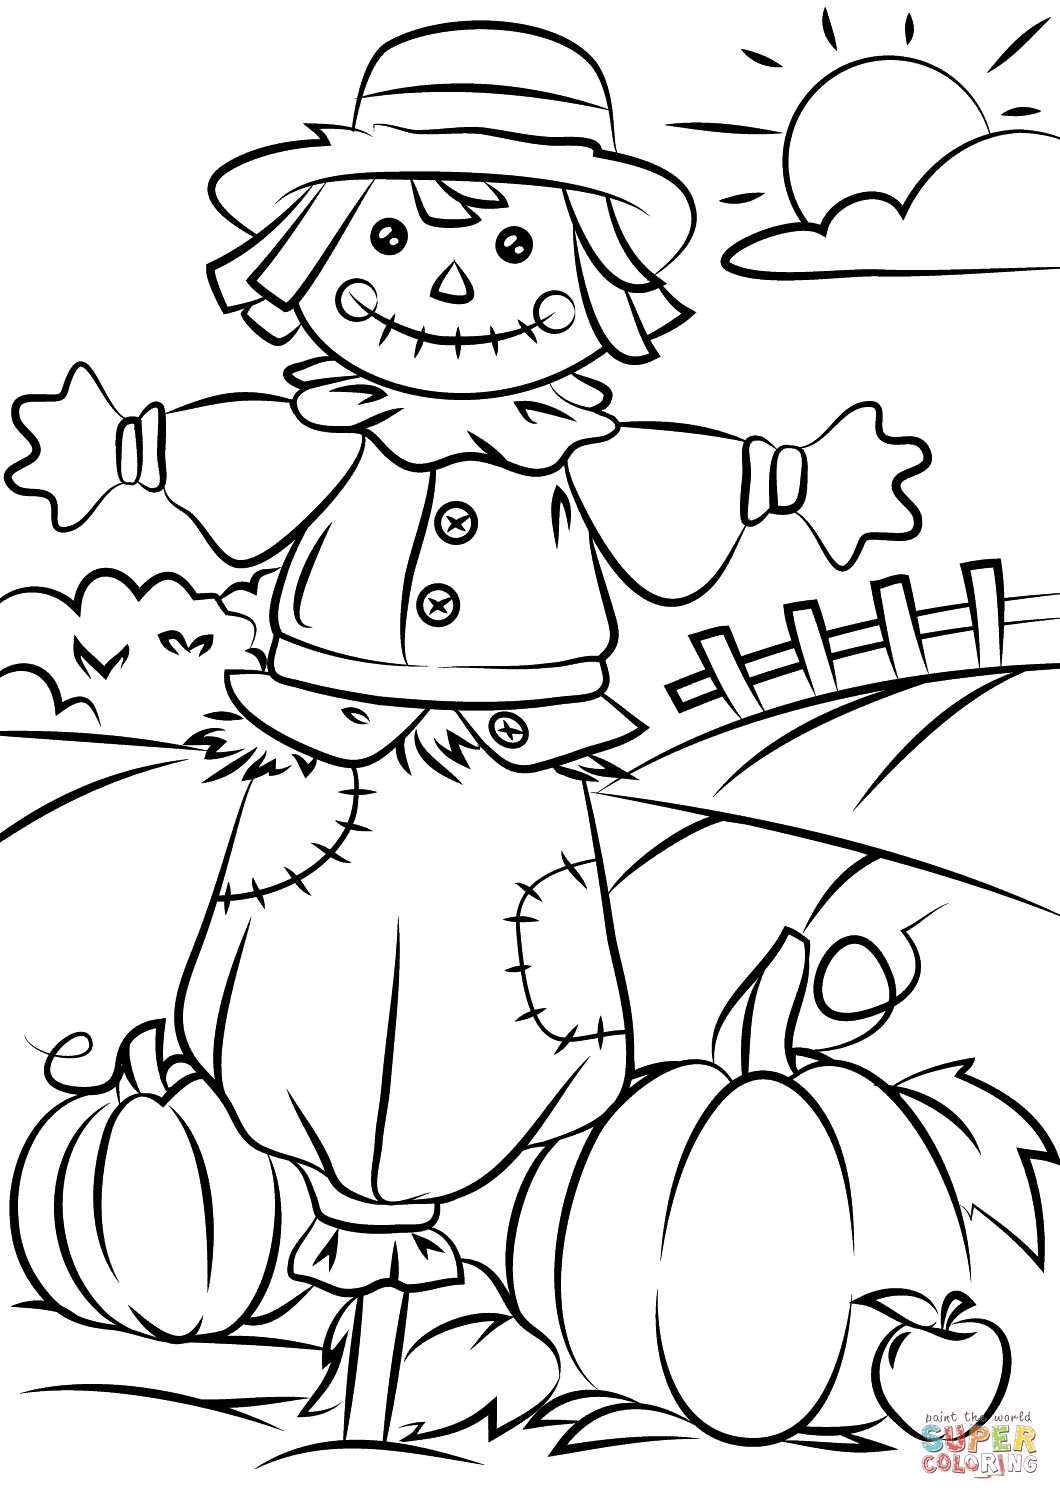 Fall Coloring Pages For Toddlers
 Autumn Scene with Scarecrow coloring page